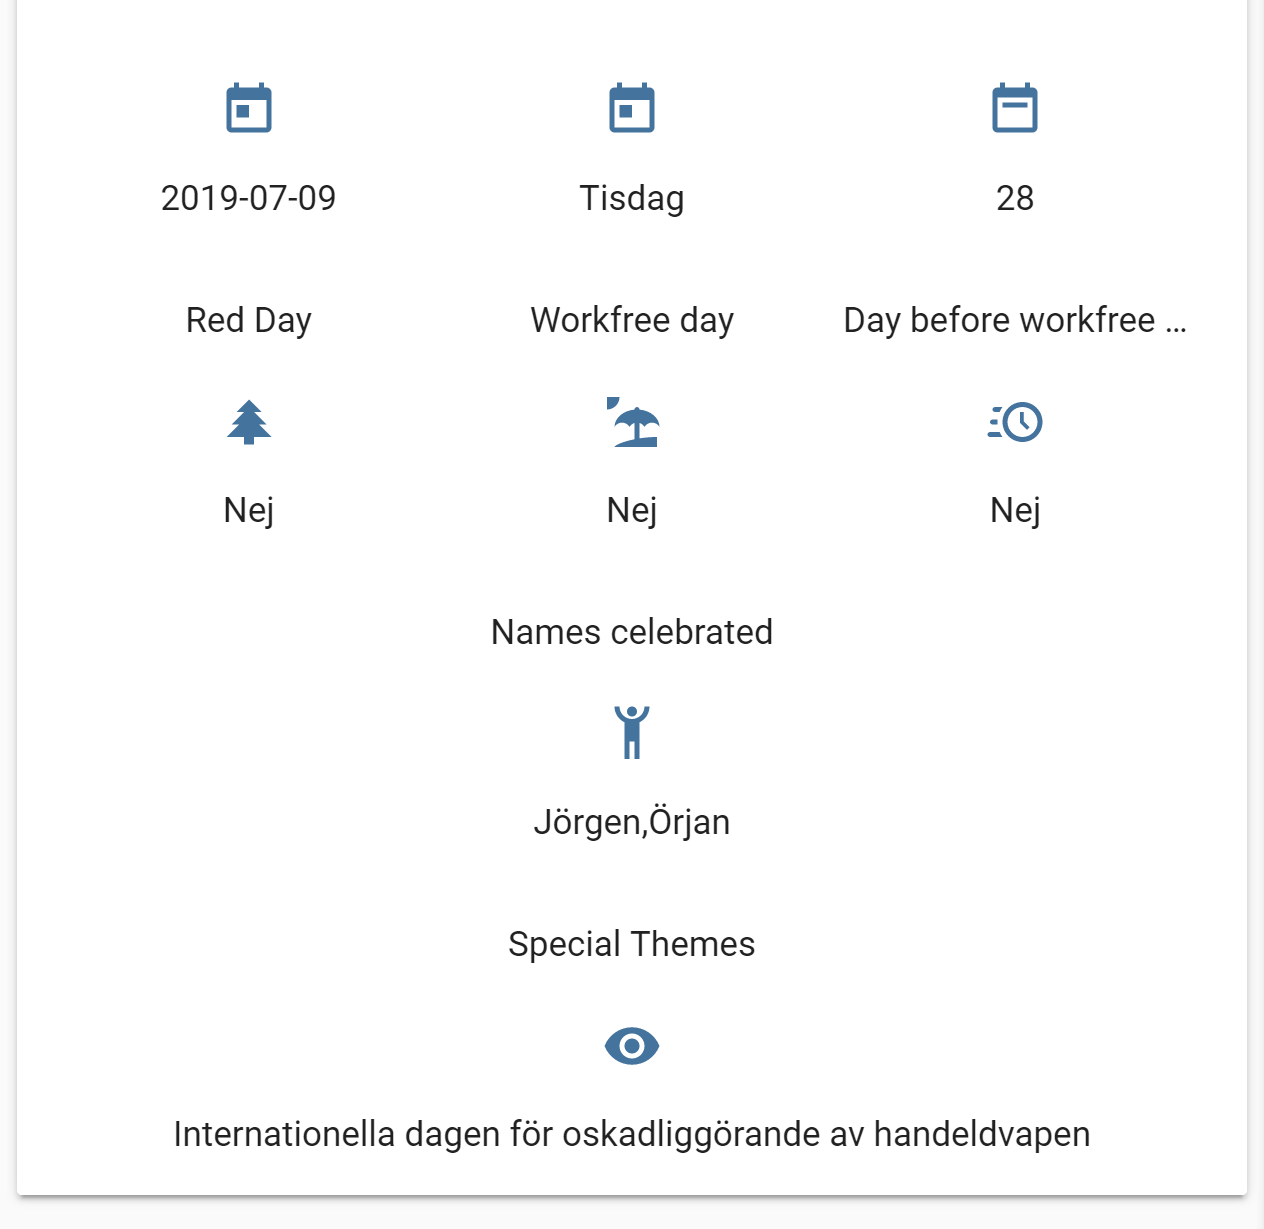 Swedish calendar with special themes